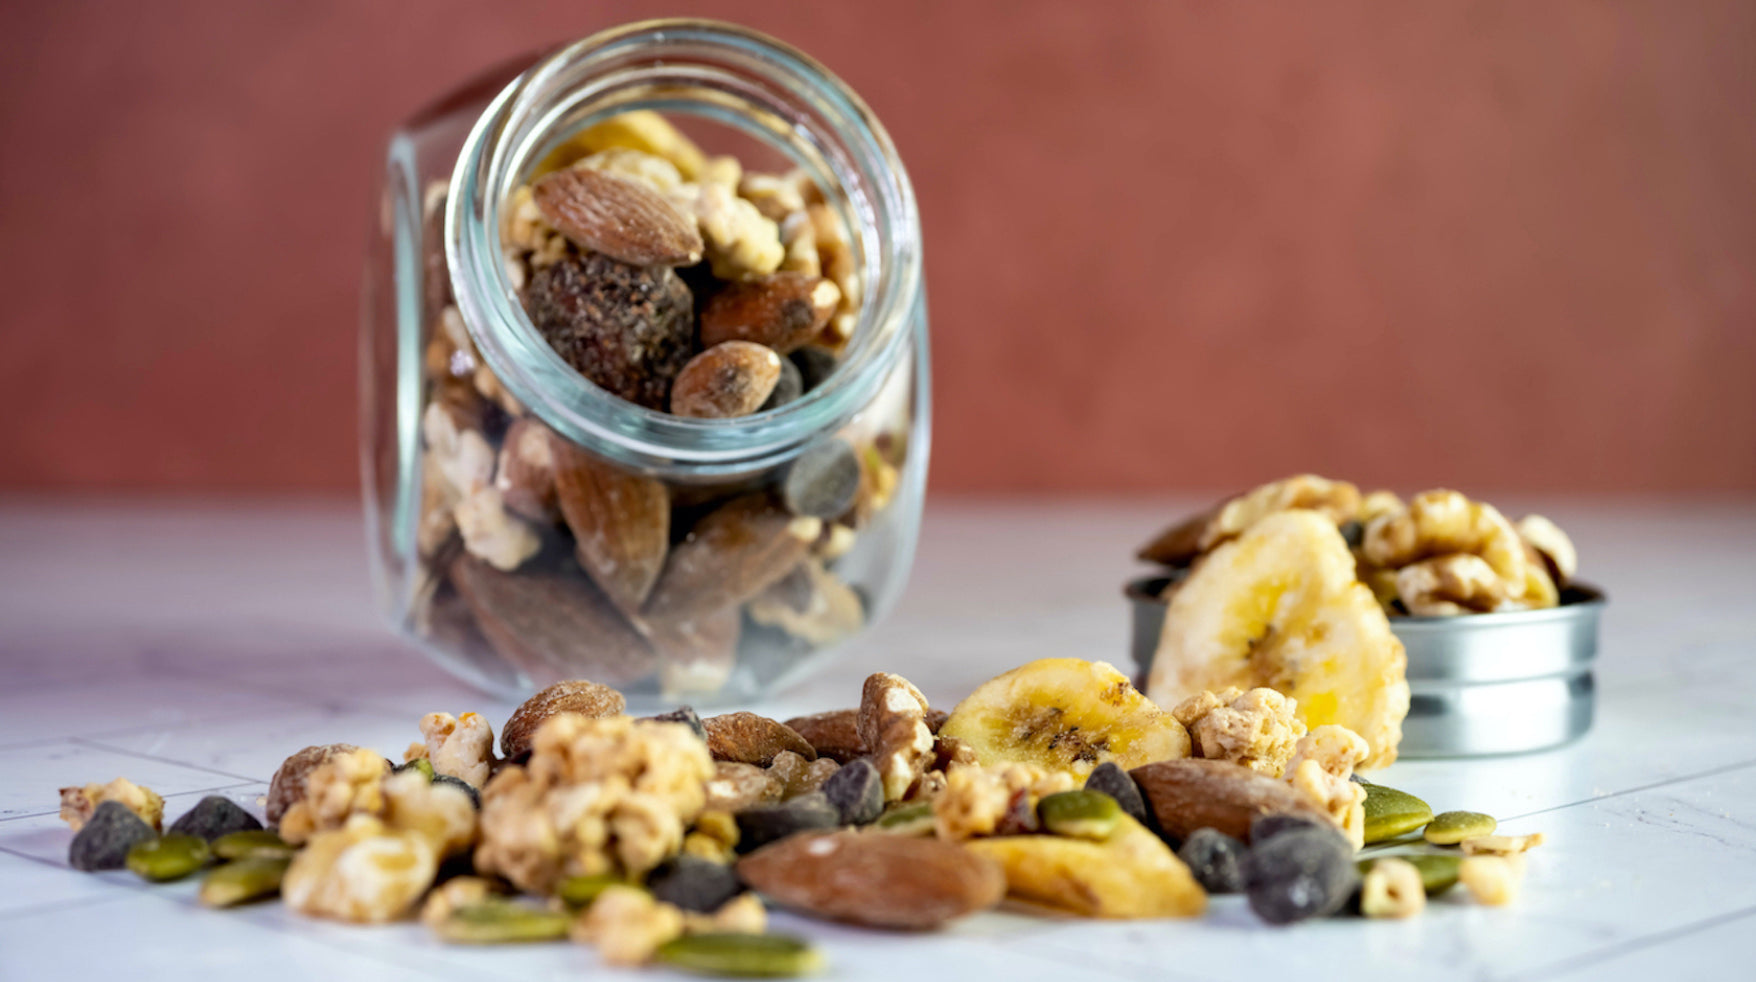 How To Keep Nuts and Dried Fruit Fresh?